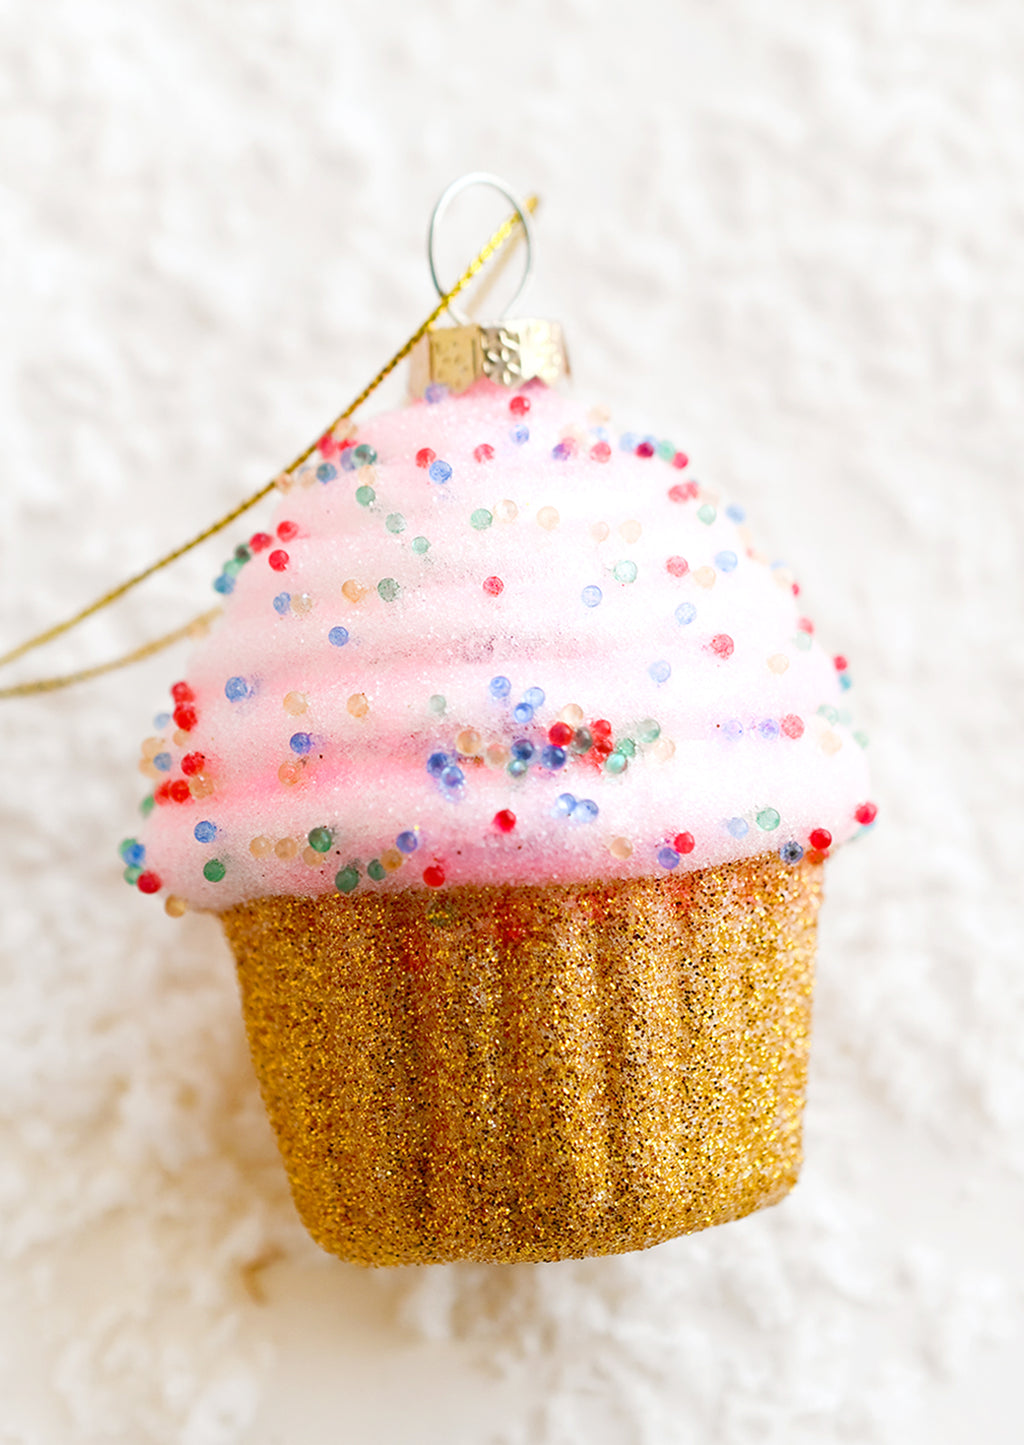 1: A holiday ornament of a pink cupcake.